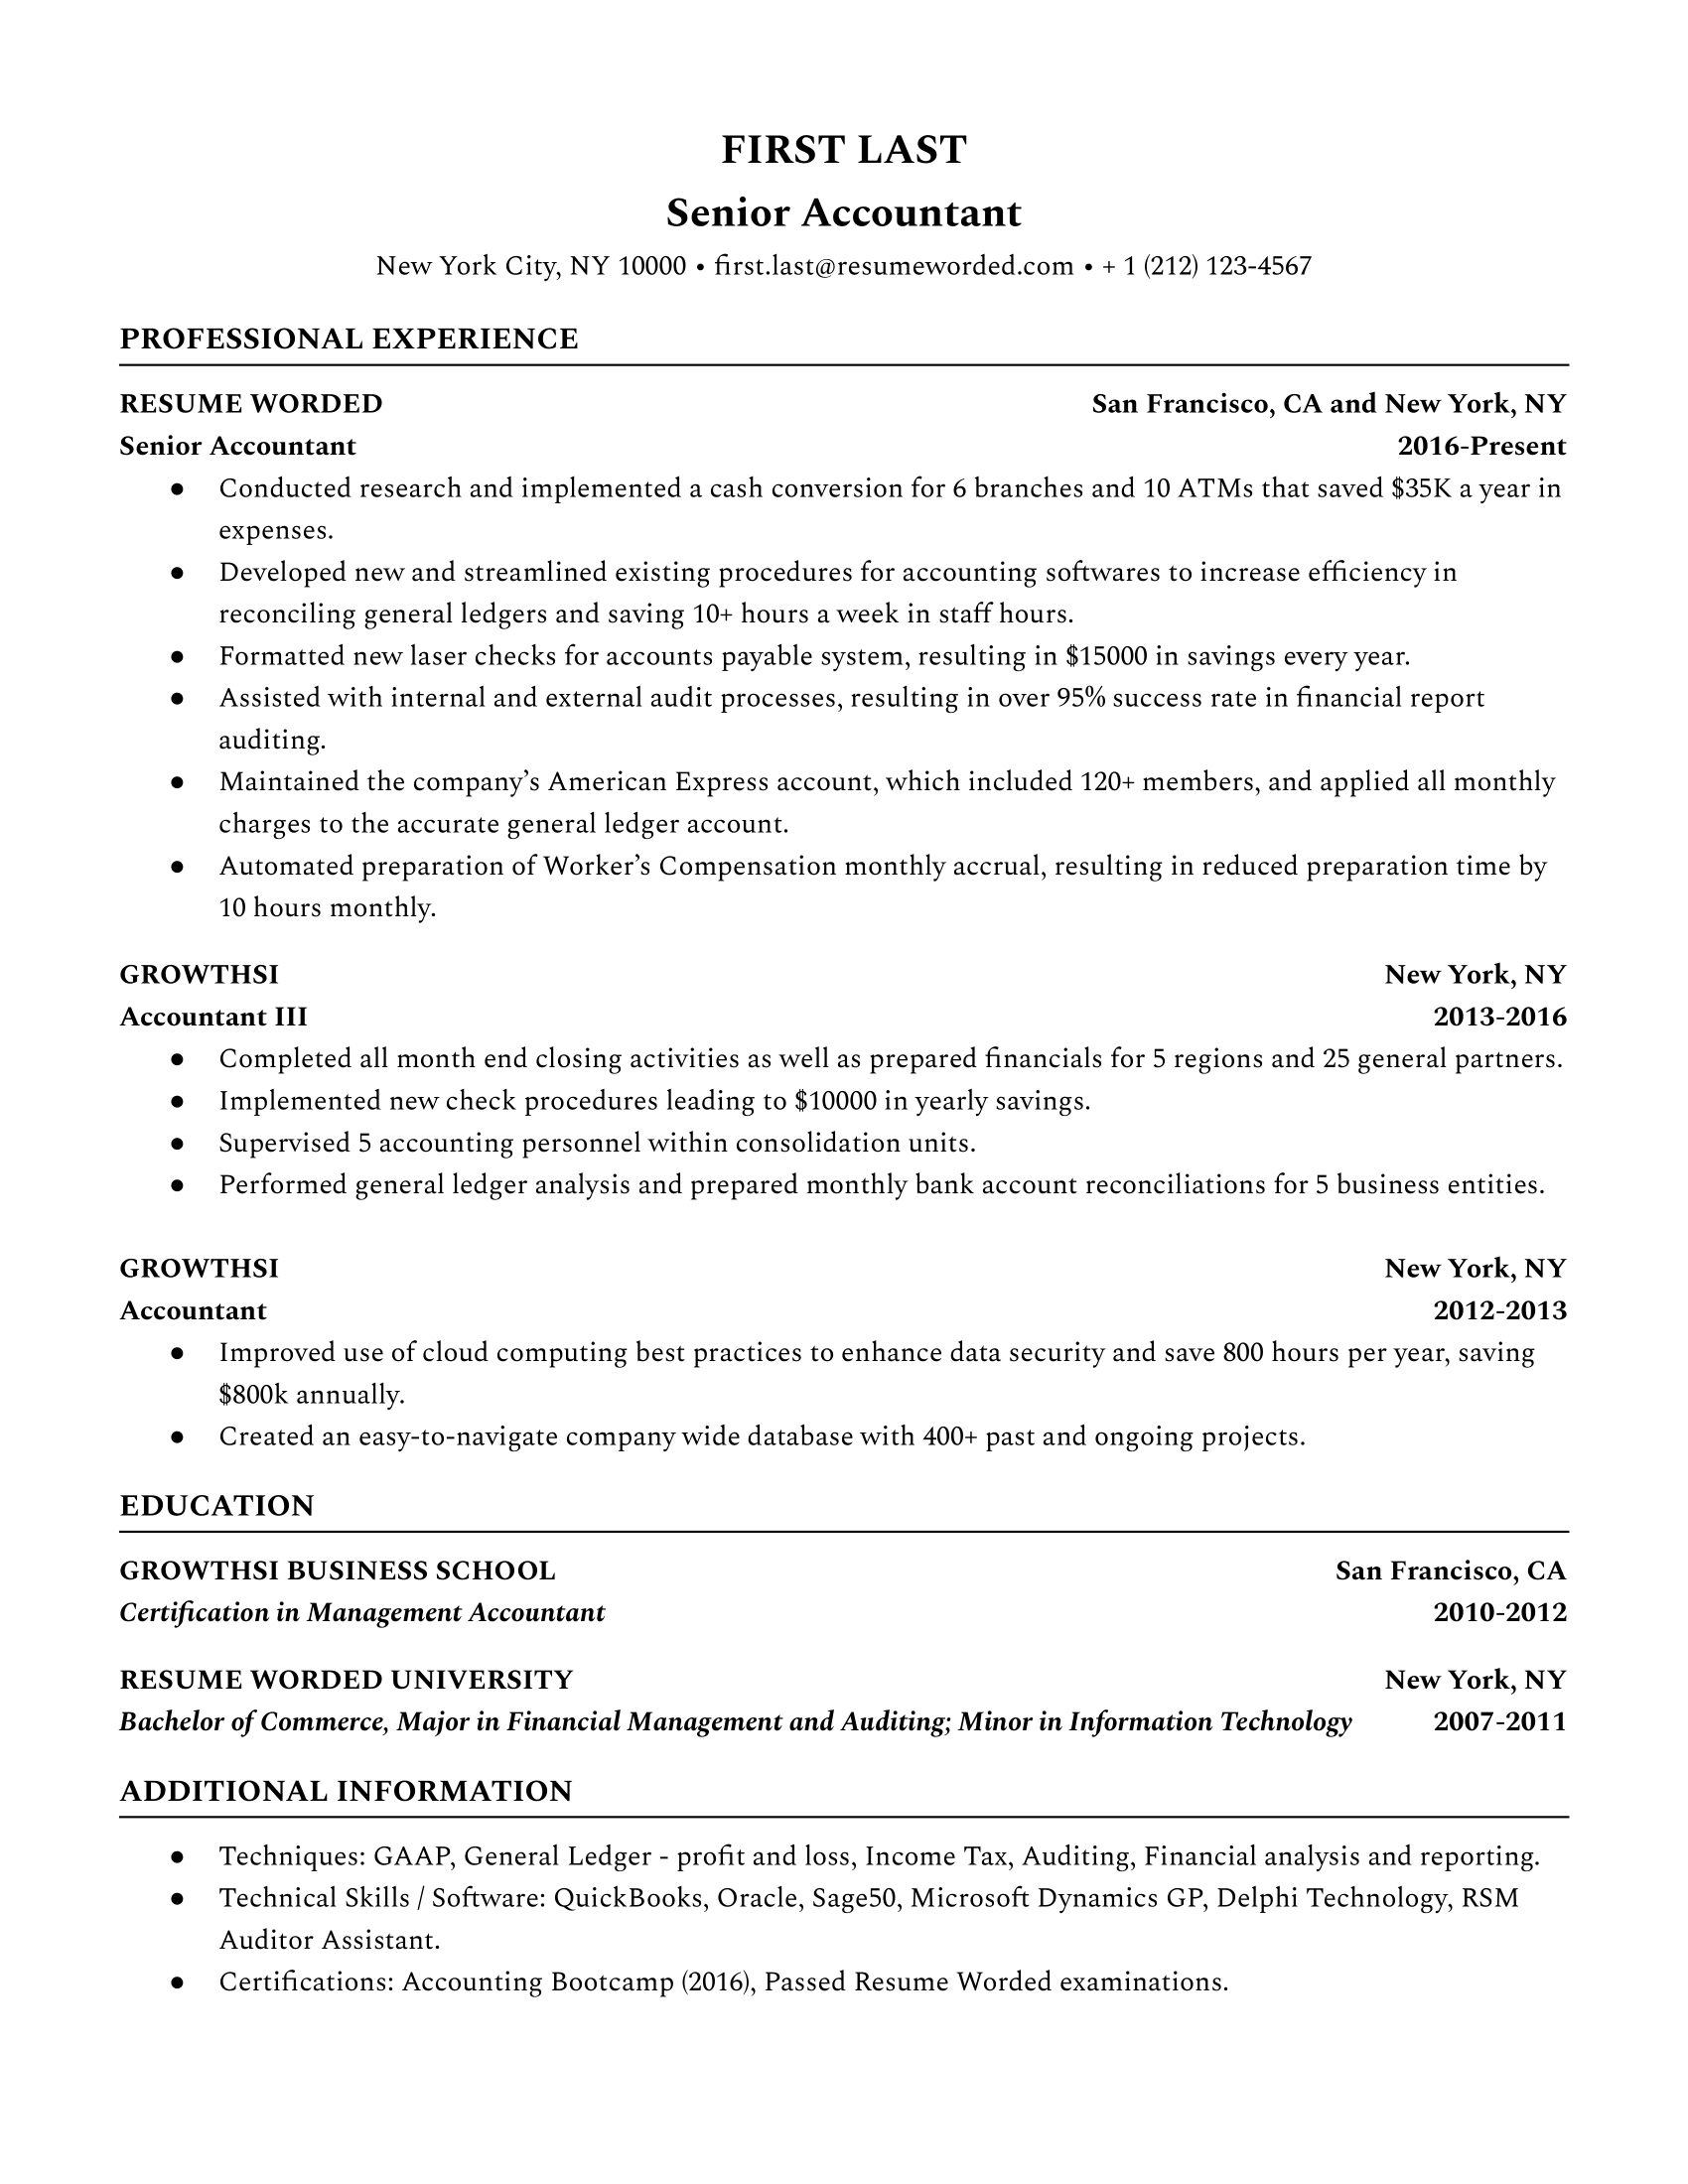 Senior accountant and accounting executive resume with hard skills section and bullet points with action verbs